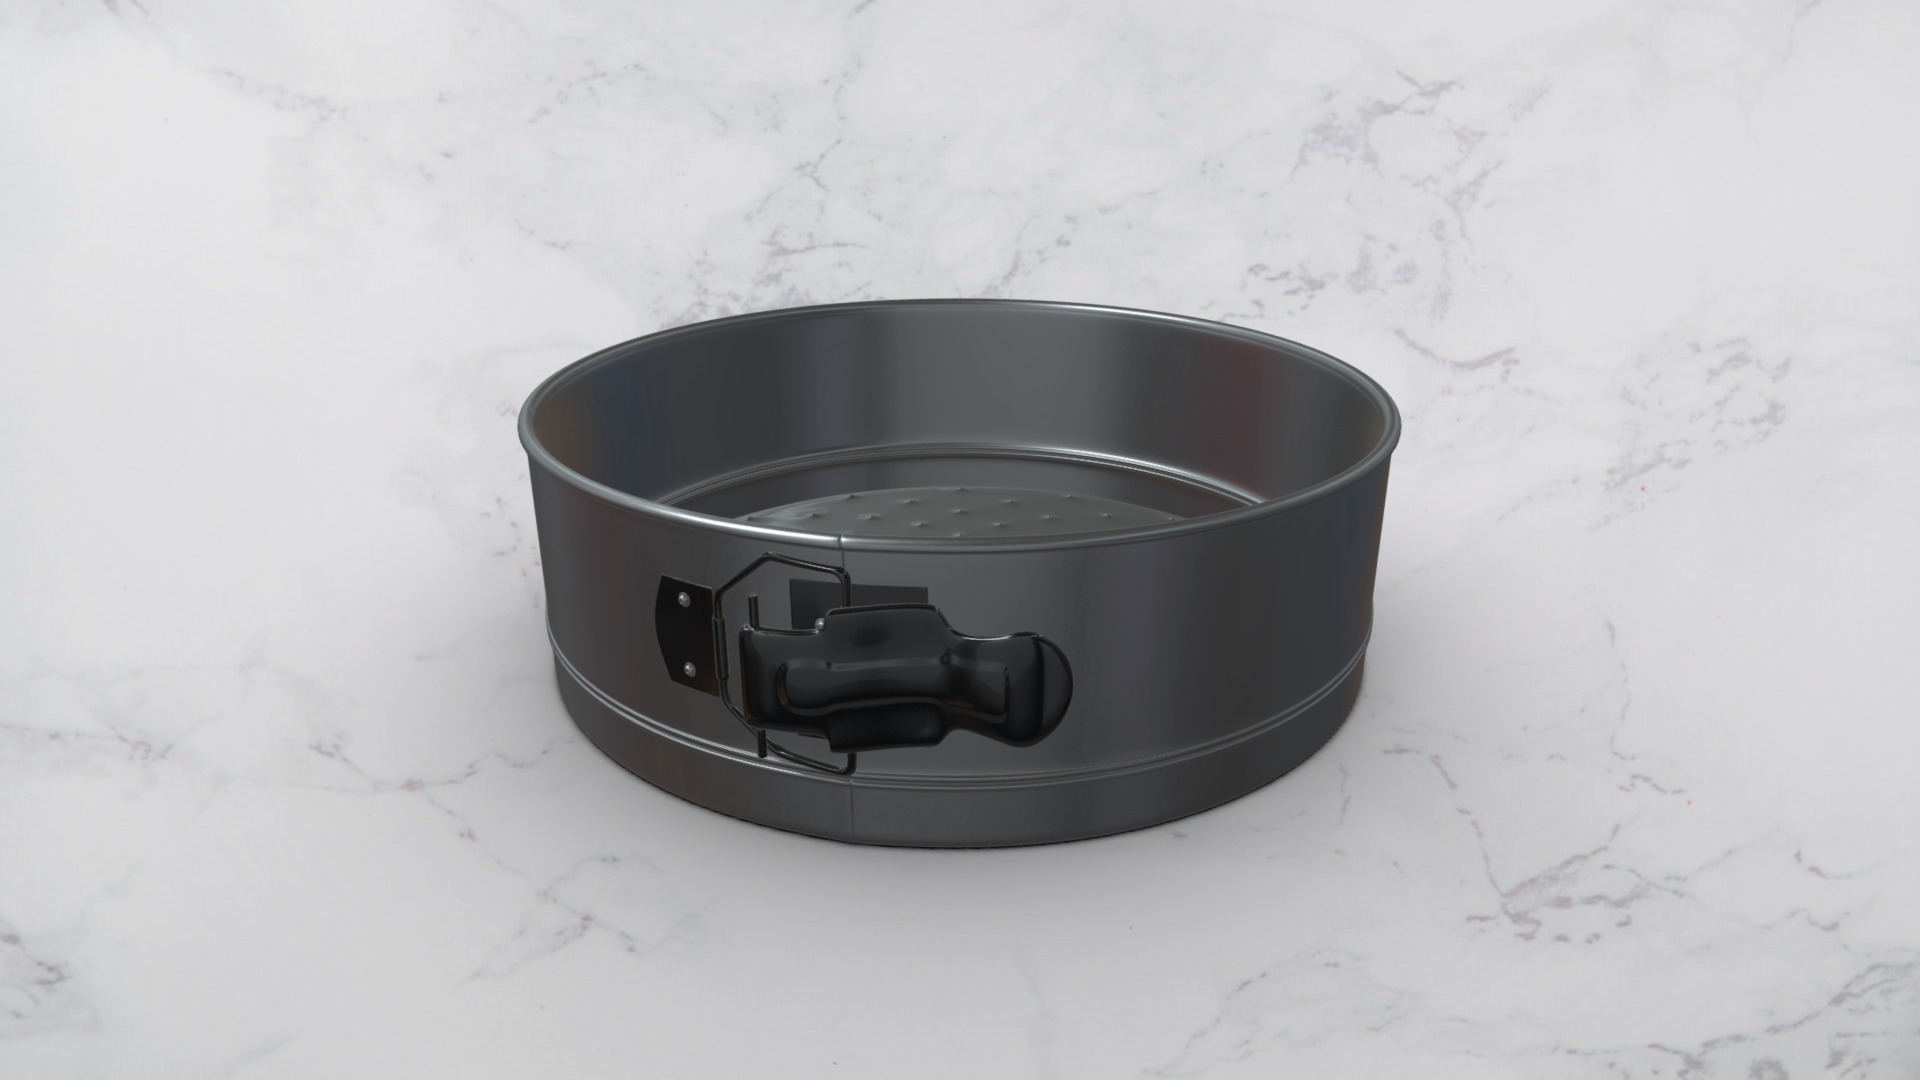 3D model Spring-Form Baking Pan - This is a 3D model of the Spring-Form Baking Pan. The 3D model is about a ring on a white surface.